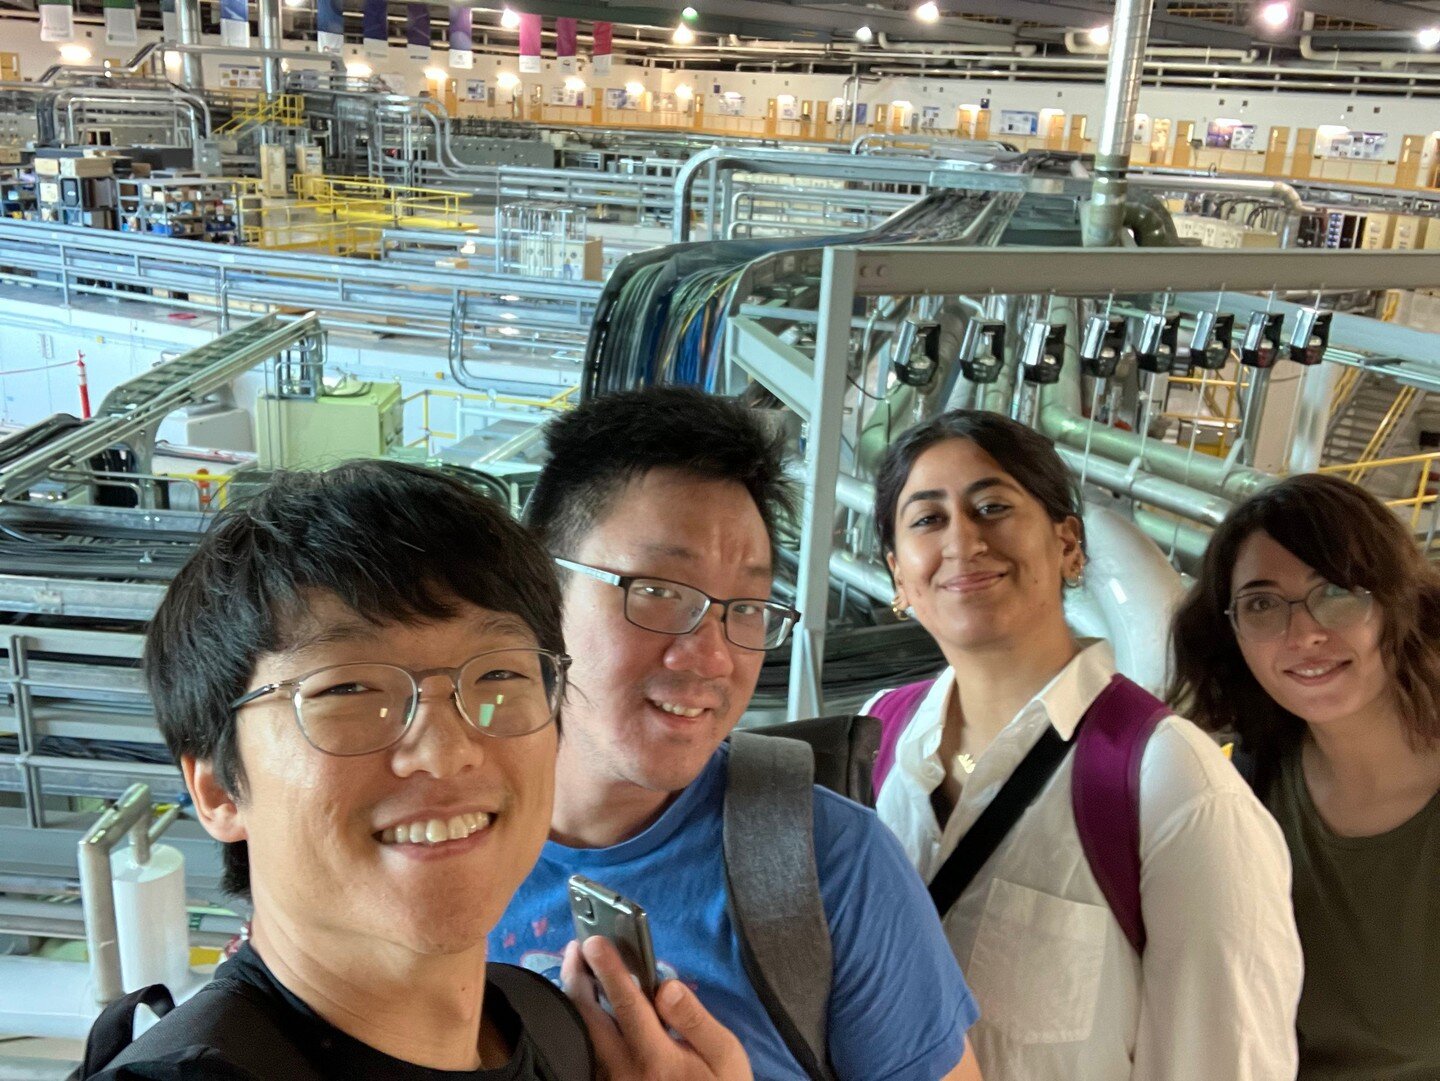 FEEL lab visited the Canadian Light Source in Saskatoon Canada to perform synchrotron X-ray experiments!

#tmufeas
#tmufeellab 
#tmuchemicalengineering 
#canadianlightsource